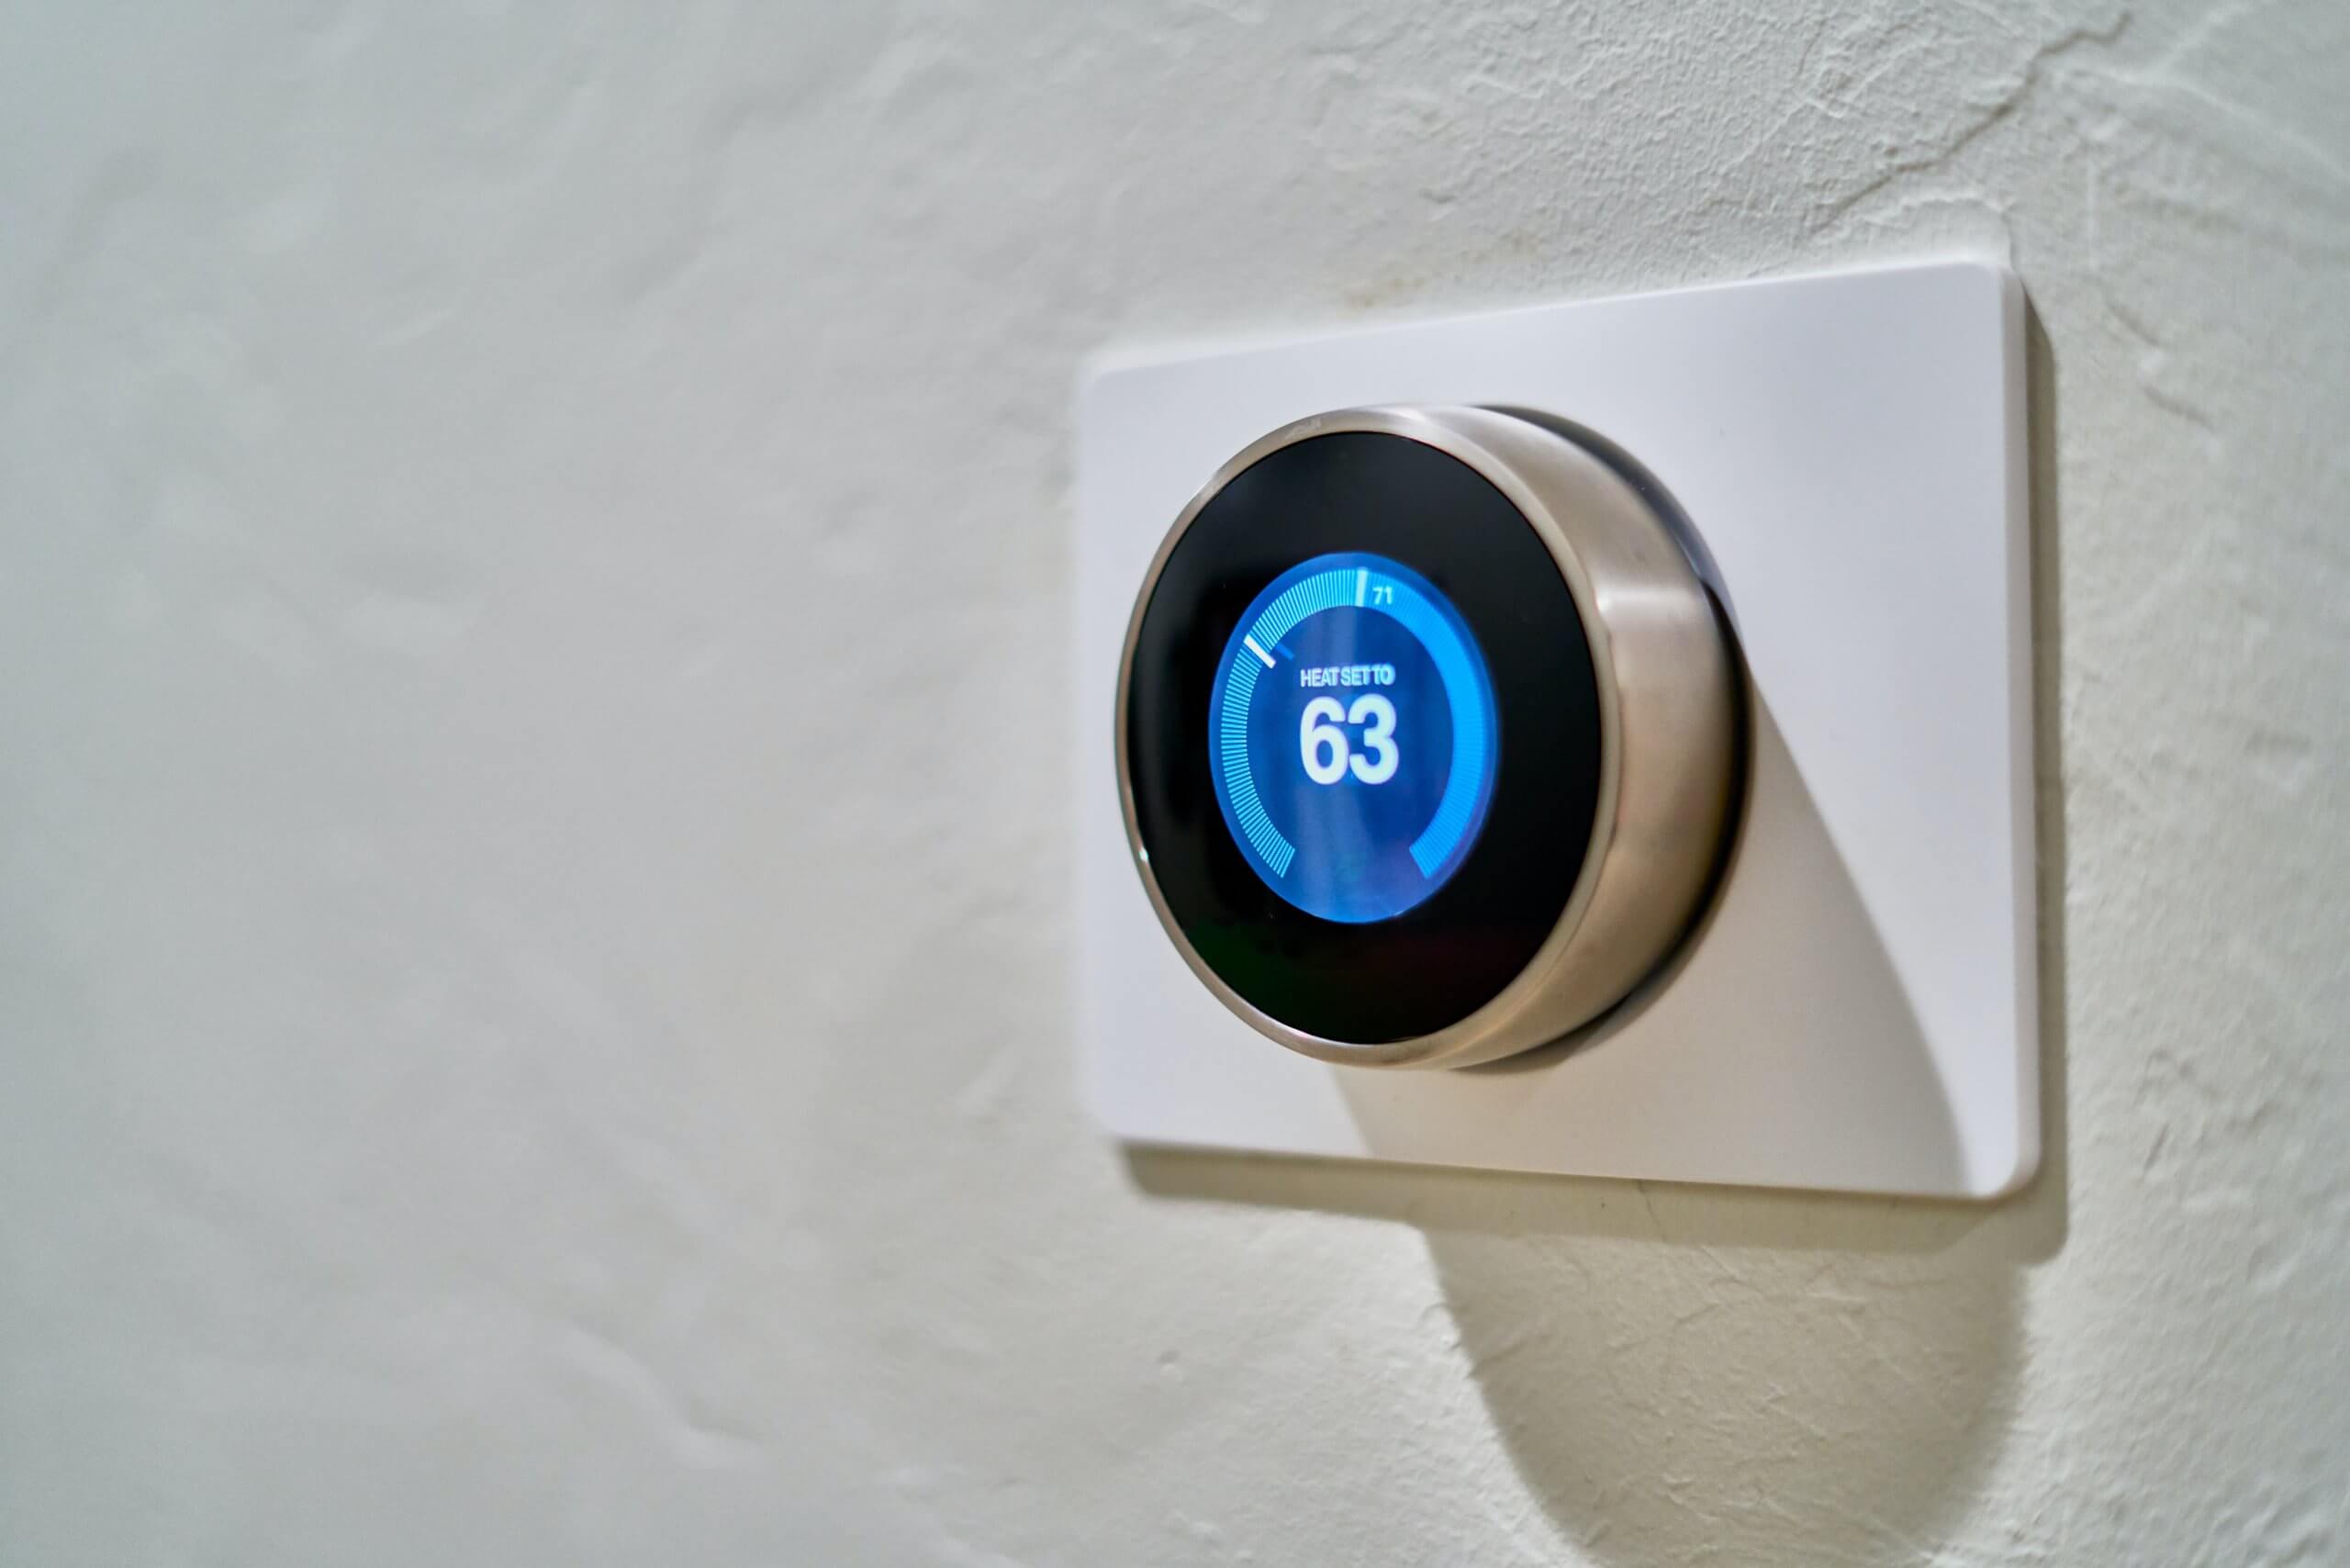 A smart thermostat has been turned on.